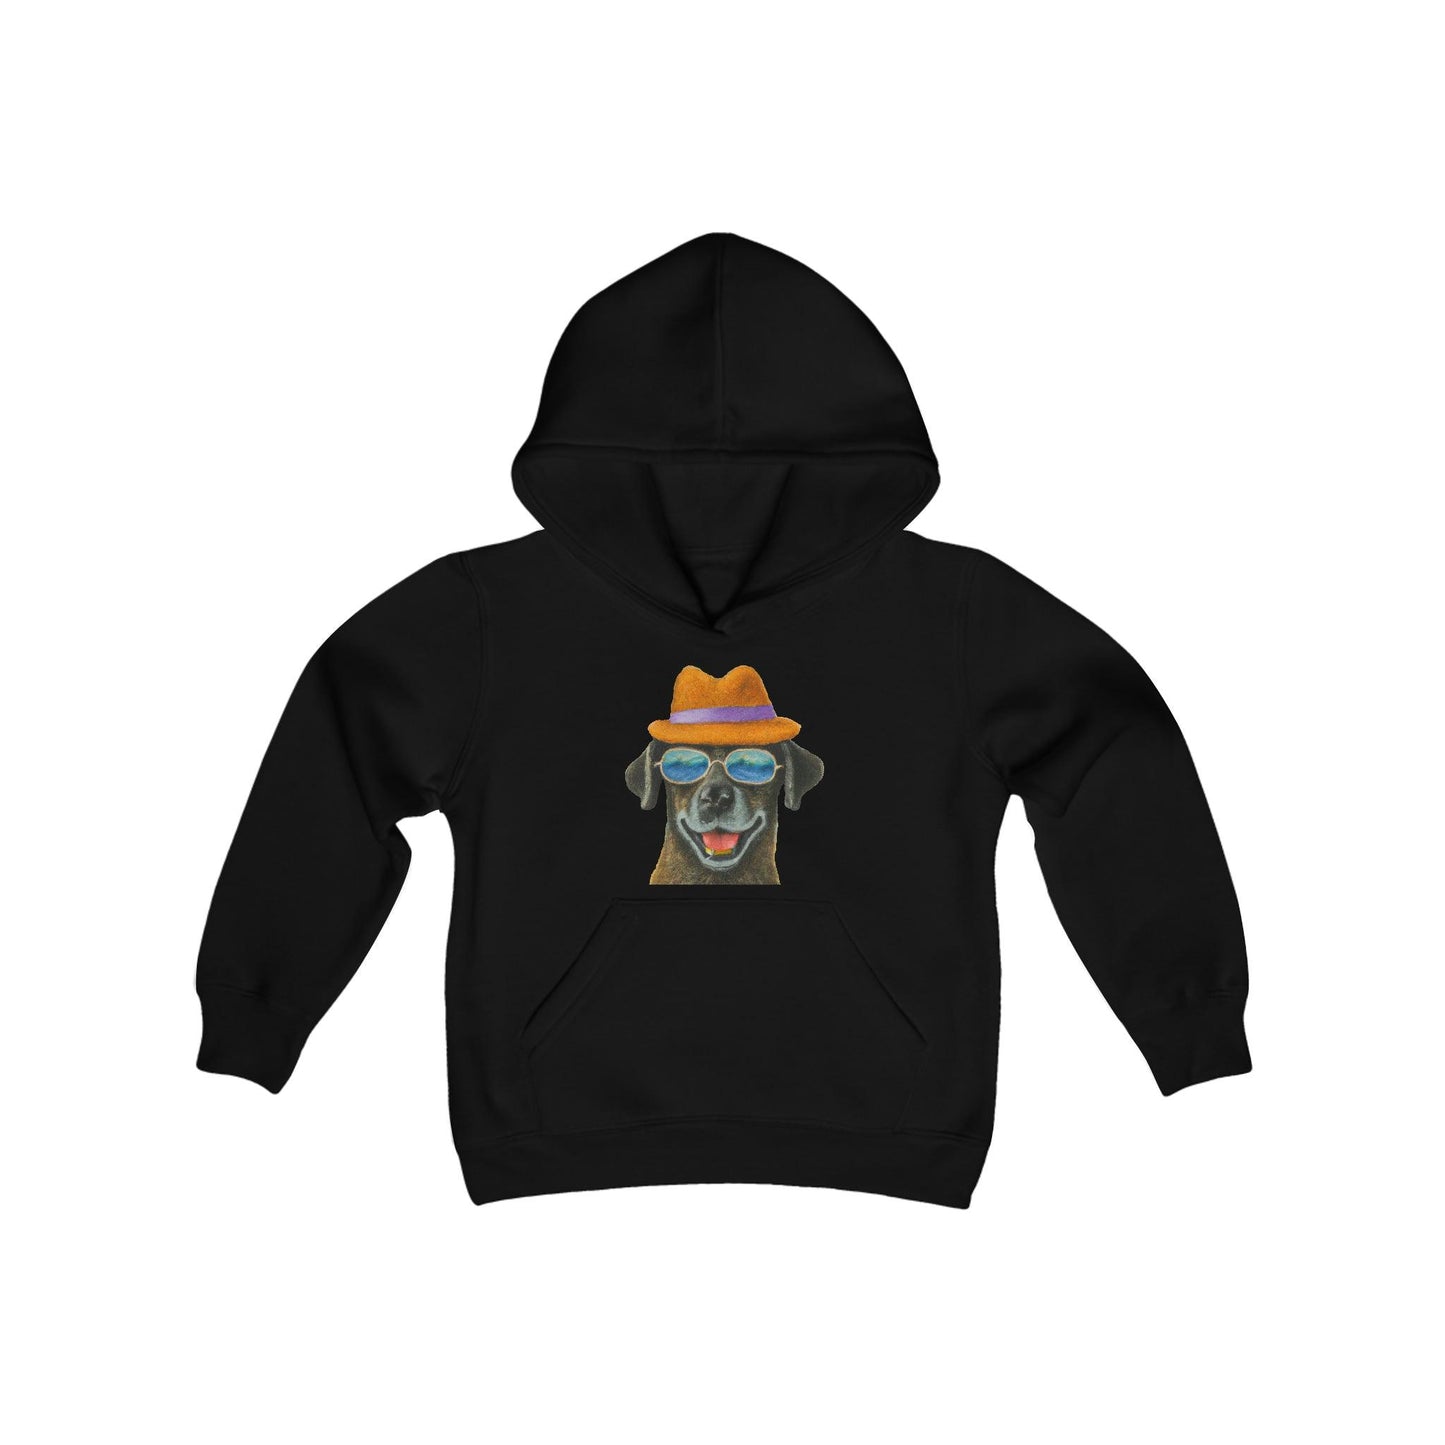 Dog at the beach wearing a hat and sunglasses painted art Youth Heavy Blend Hooded Sweatshirt